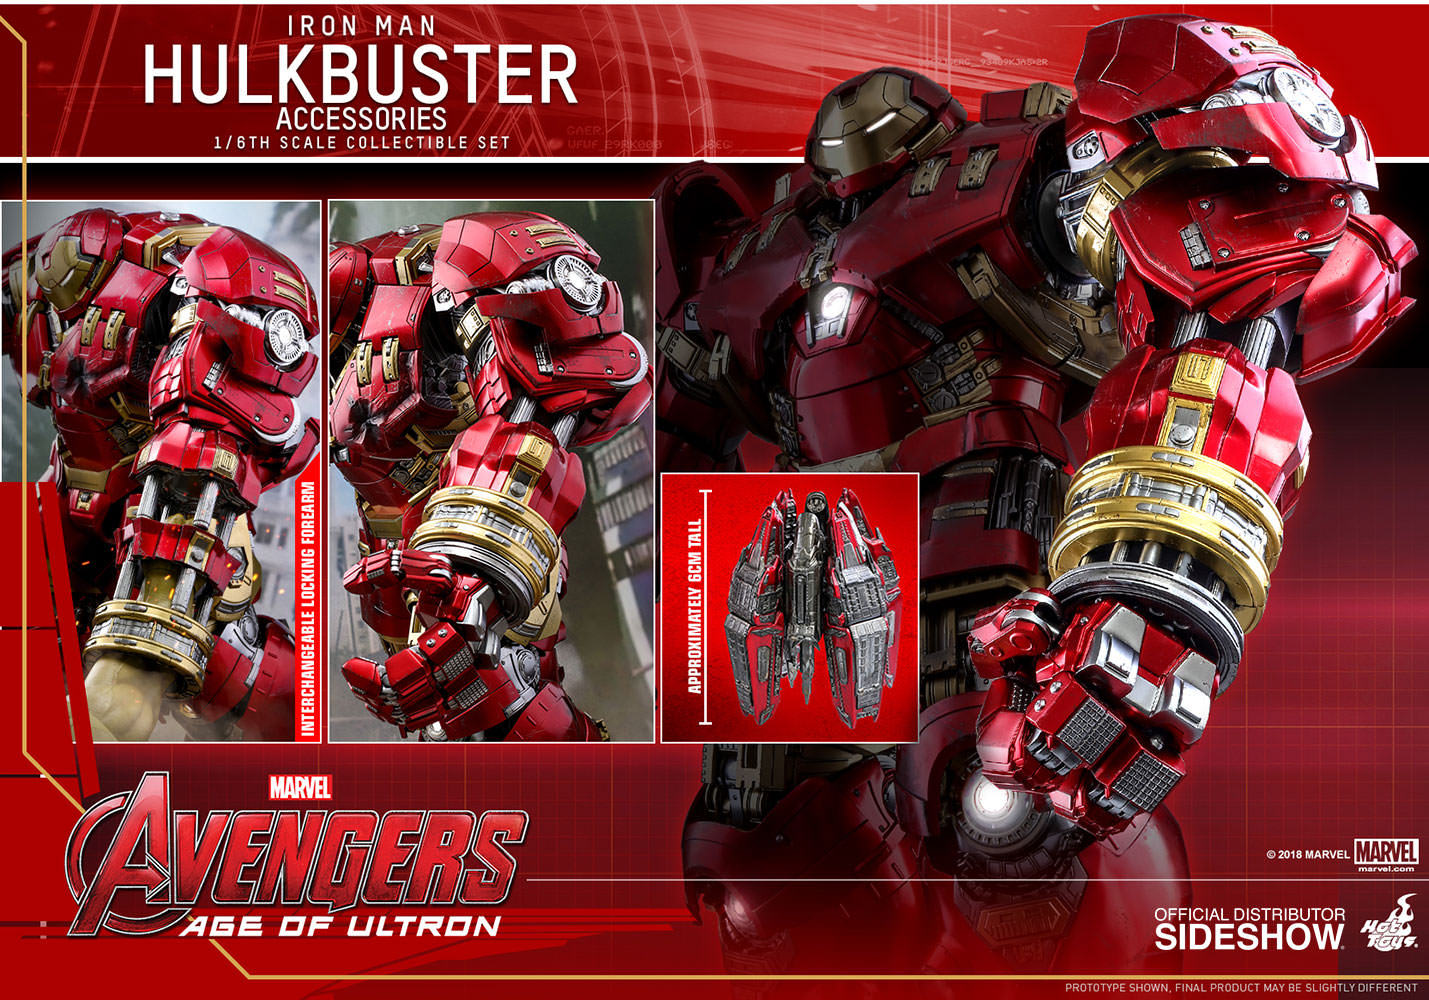 Hot Toys 1/6 Marvel's Avengers Age of Ultron Hulkbuster Accessories Sixth Scale ACS006